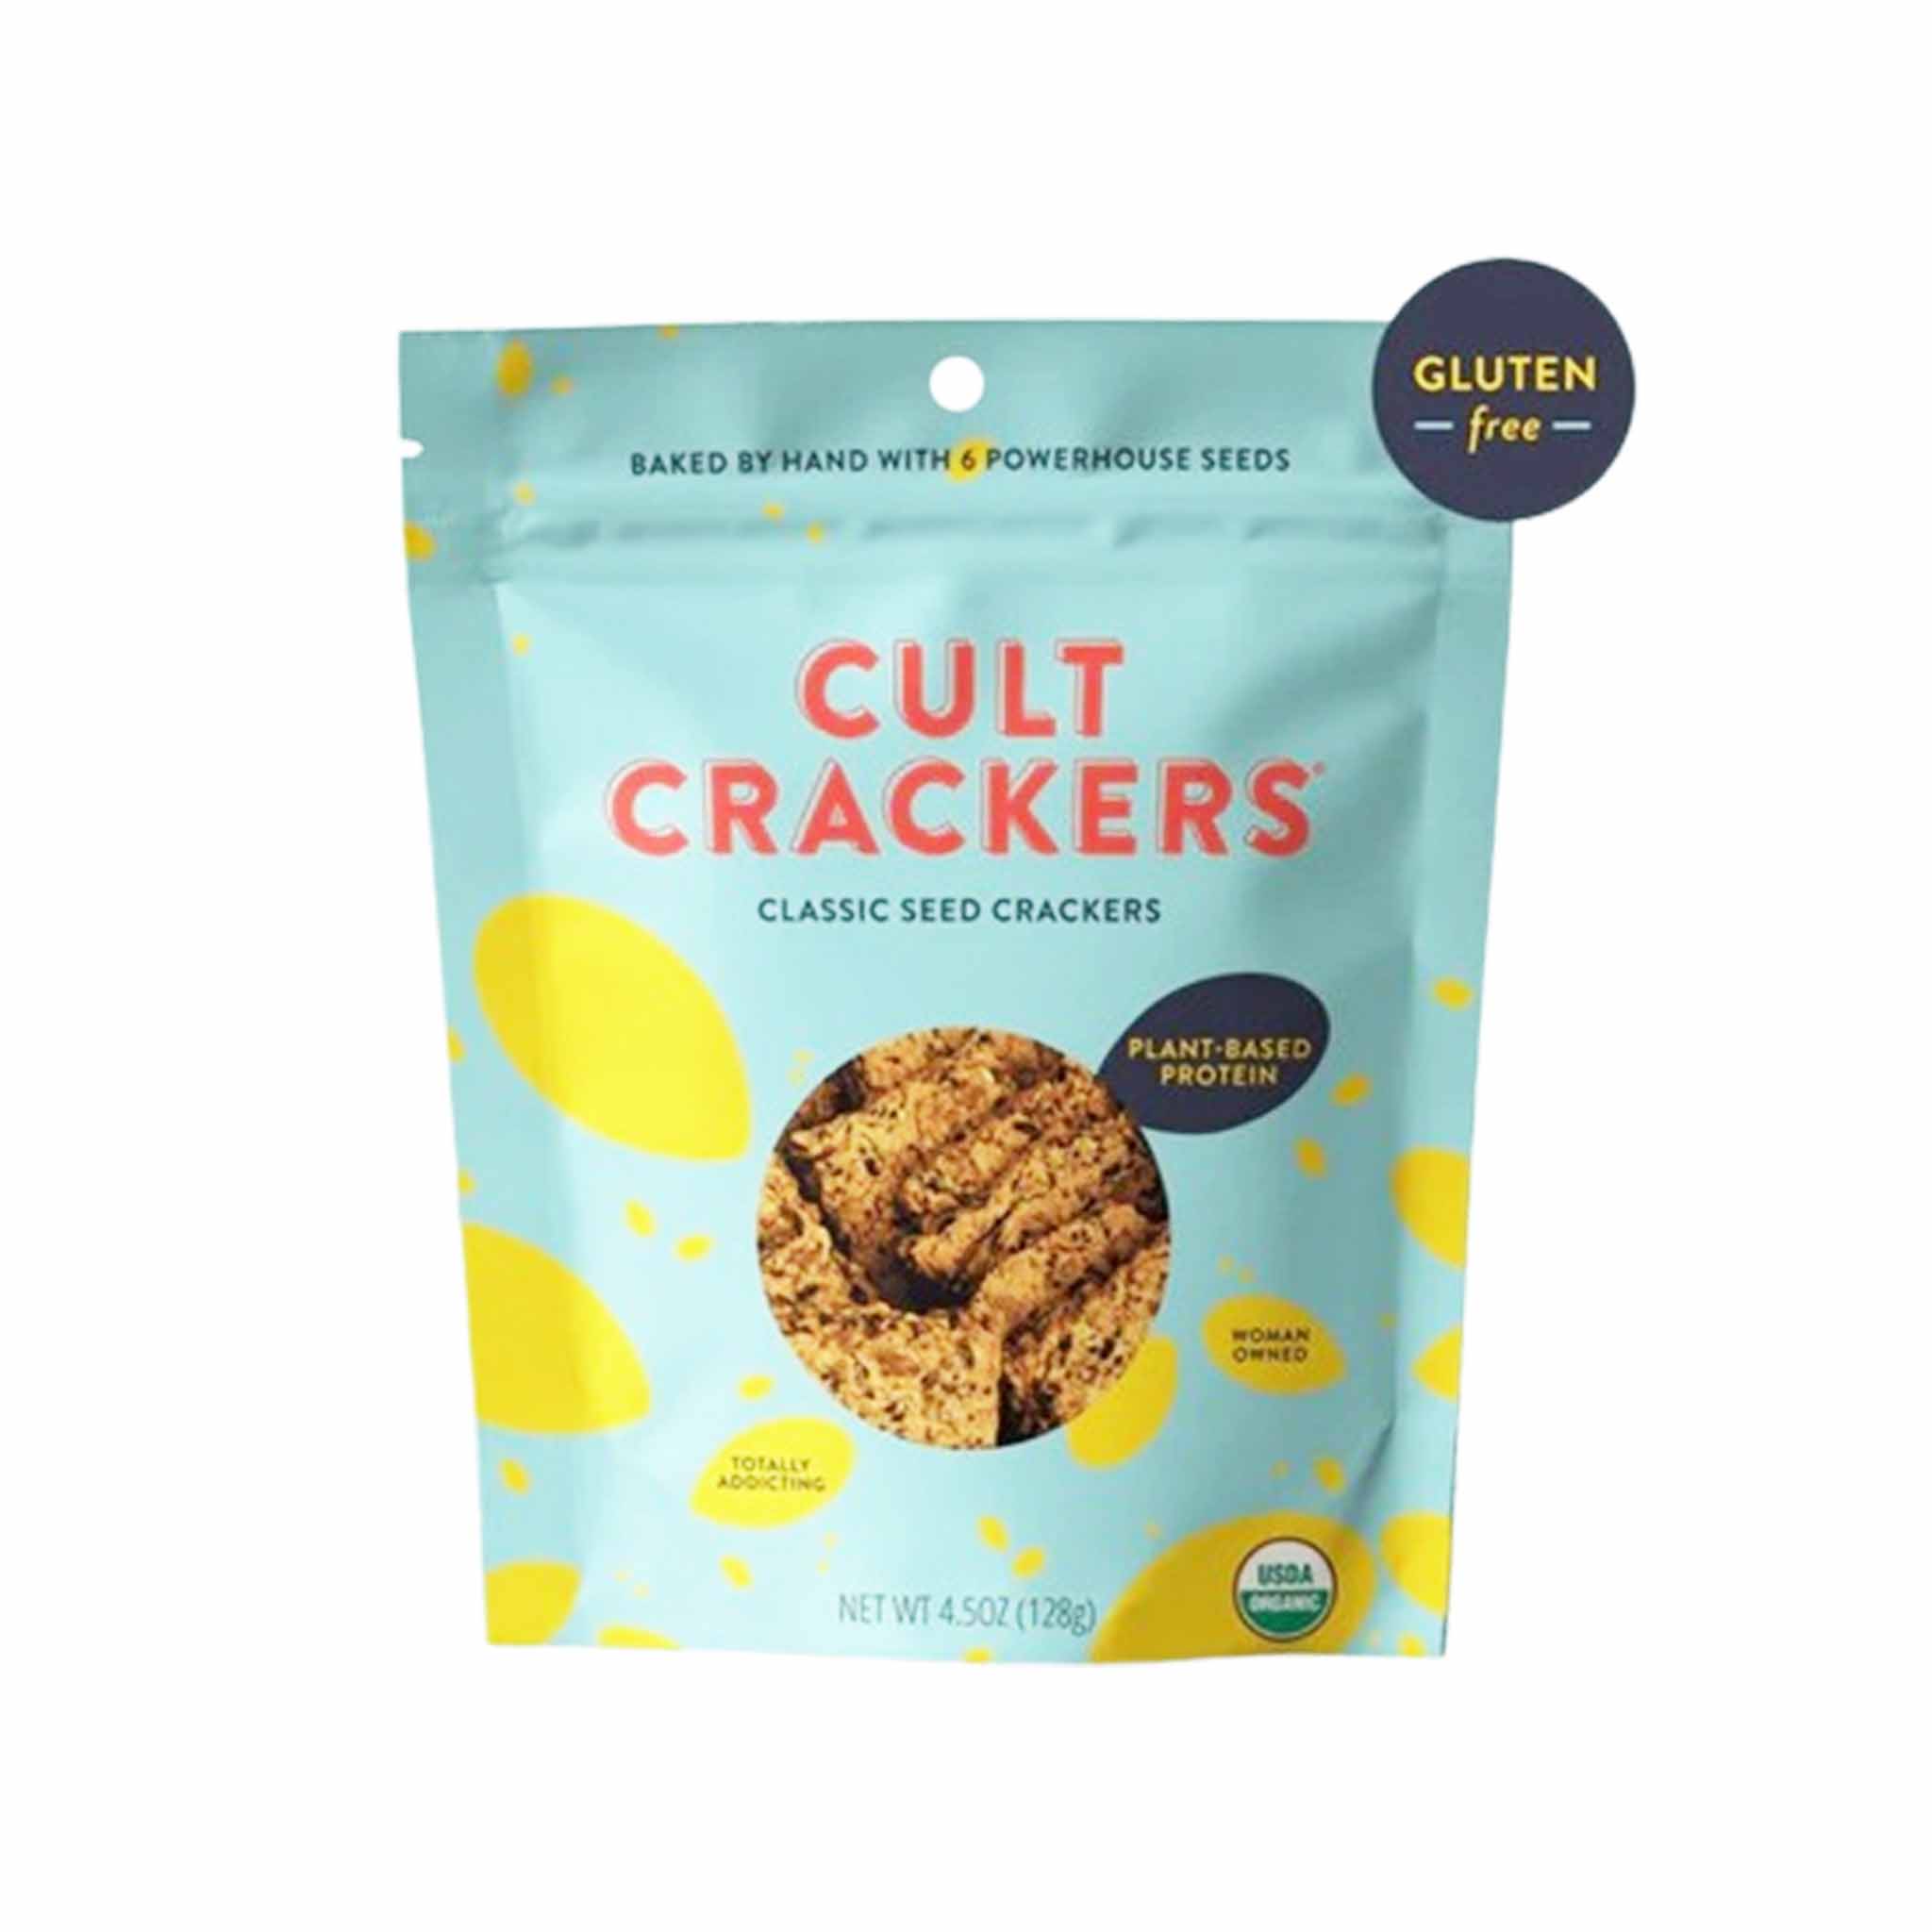 CULT GLUTEN FREE CLASSIC SEED CRACKERS 128g